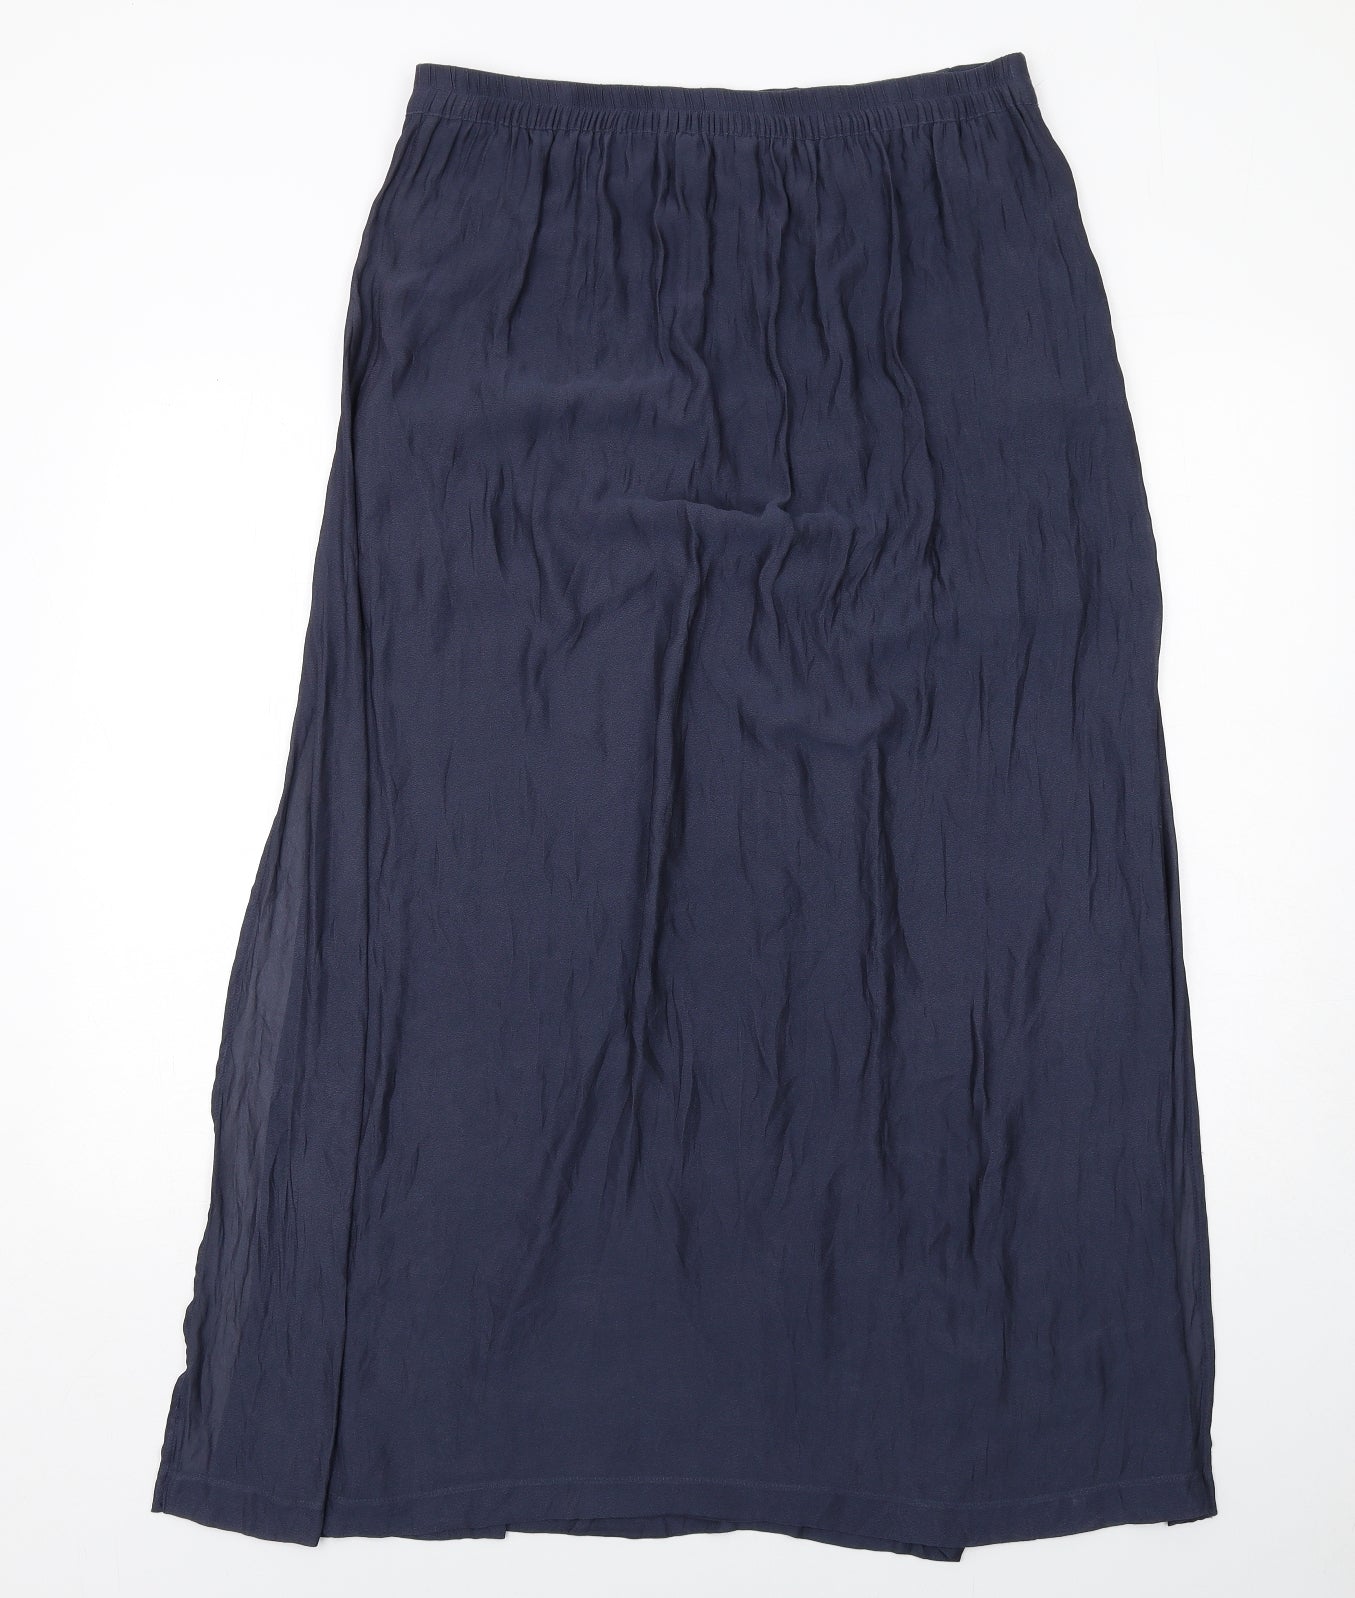 EDC Womens Blue Polyester Pleated Skirt Size 12